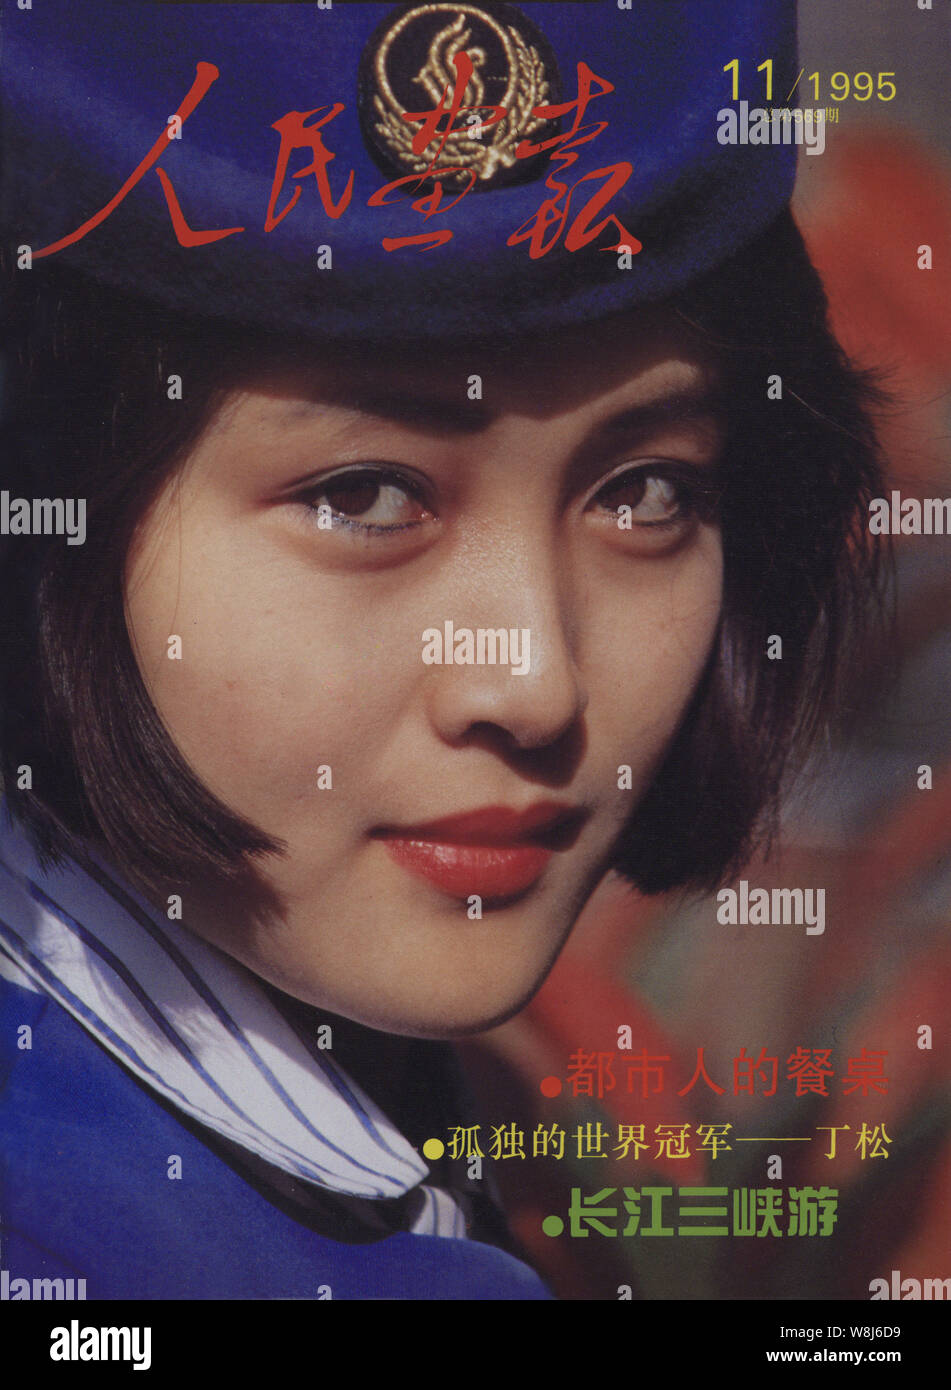 This cover of the China Pictorial issued in November 1995 features a Chinese air hostess wearing uniform of Air China. Stock Photo